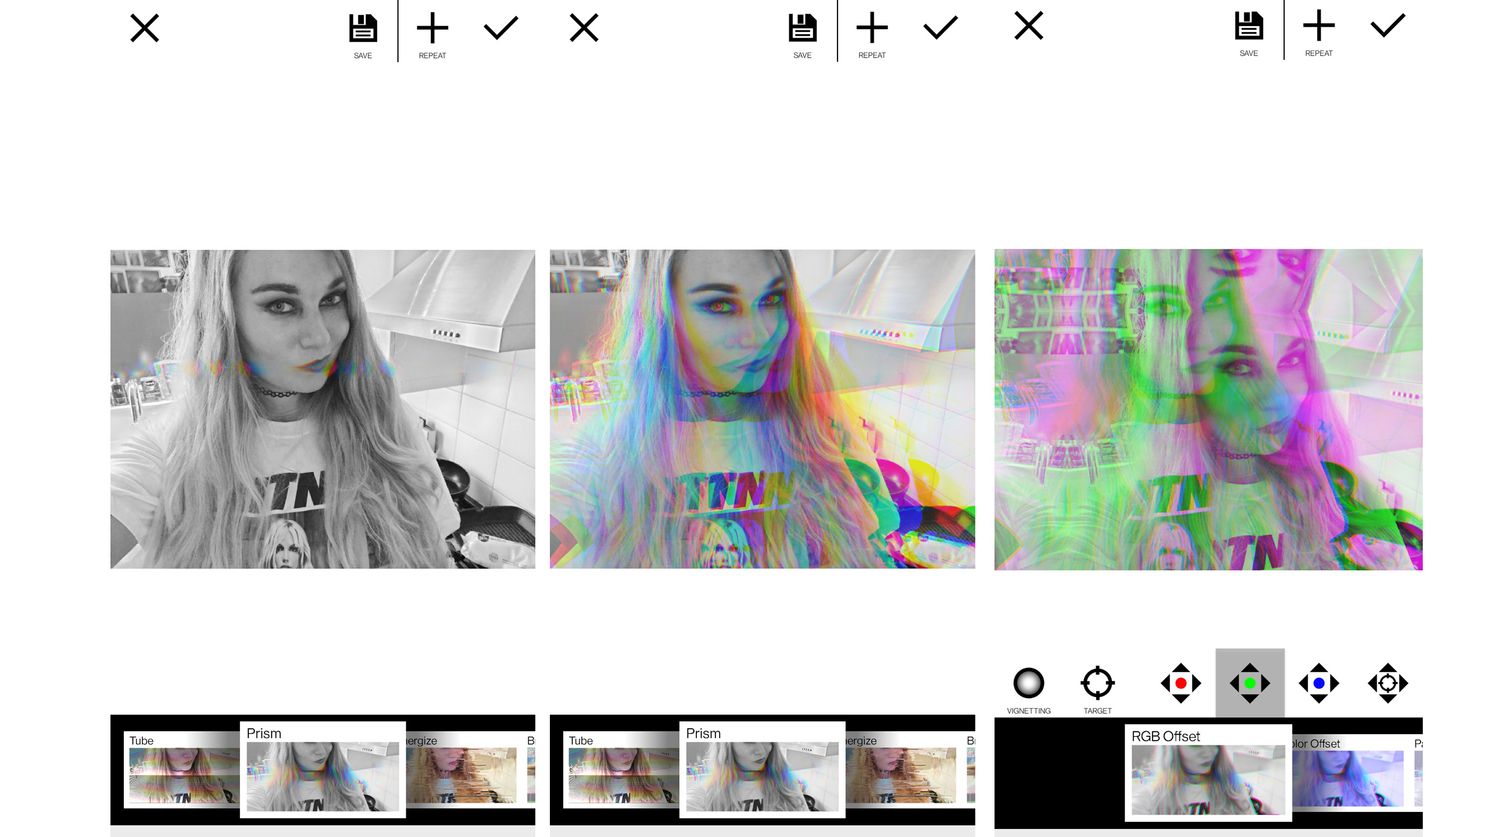 App of the week: Edit your photos in an original way with Glitch Lab